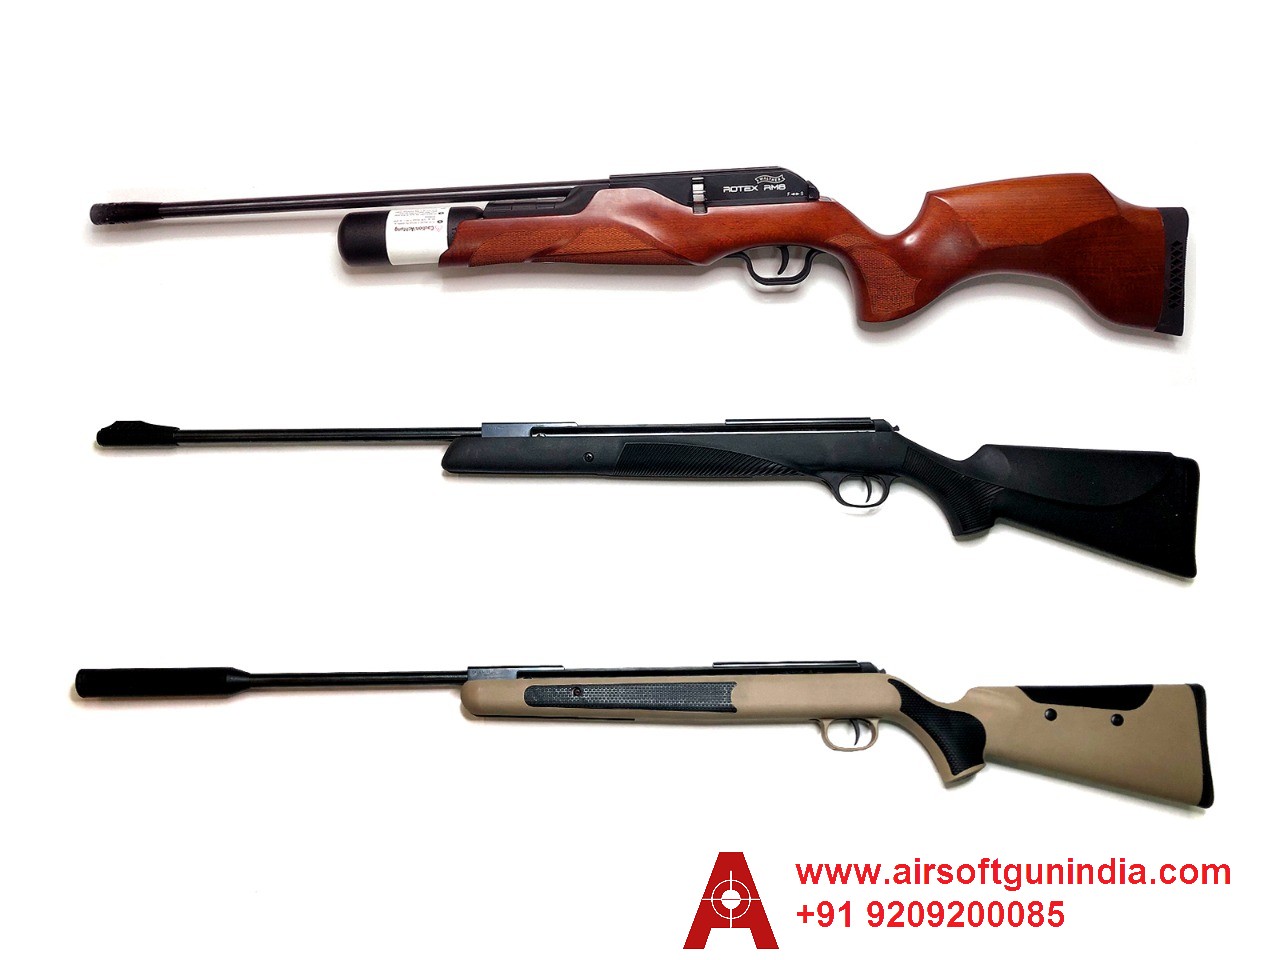 Imported Air Rifle In India